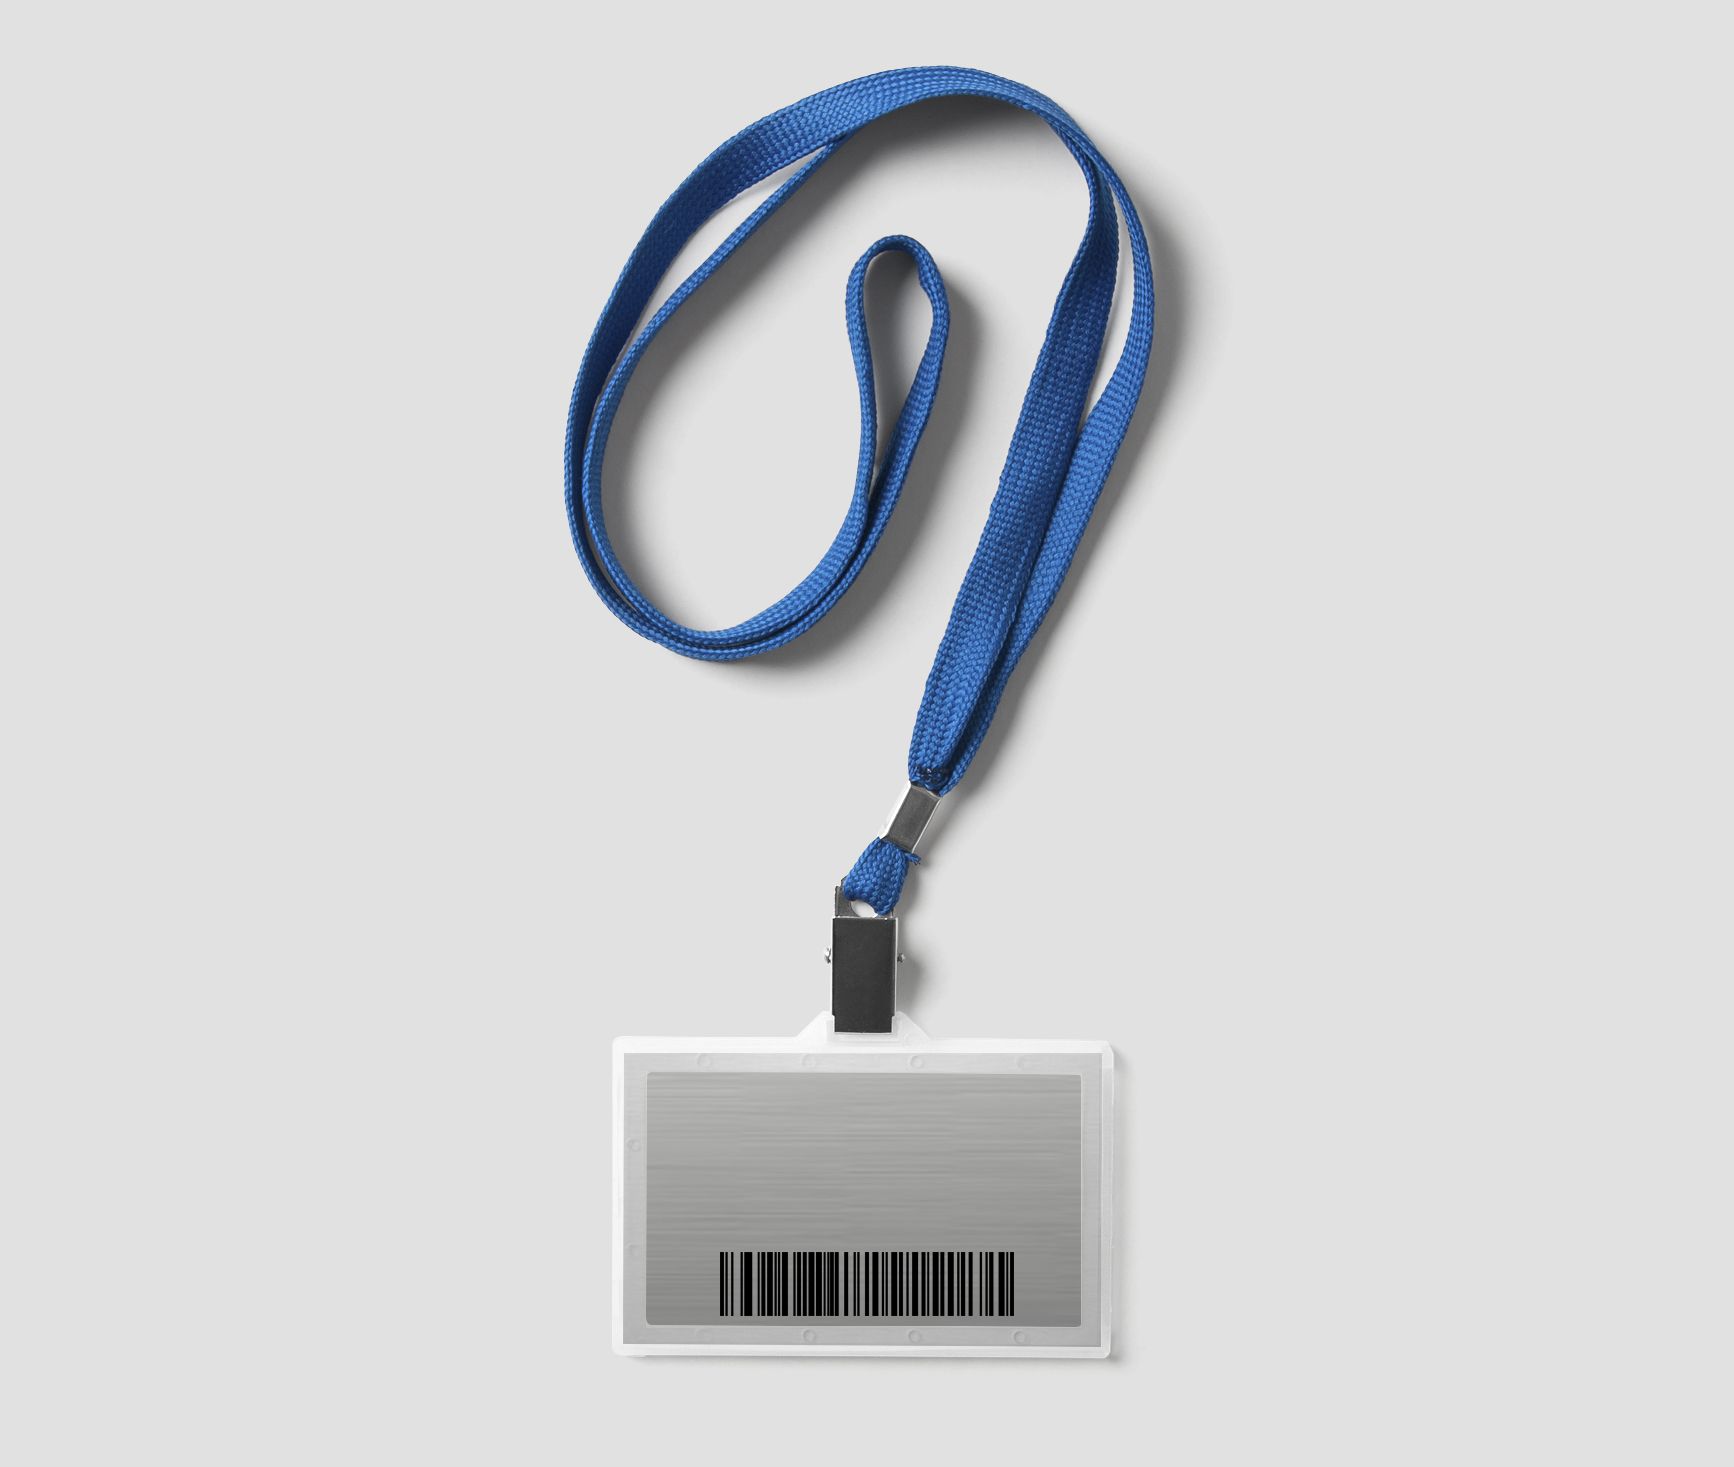 Picture for the barcode printing option of the CCT ISO card of STid Industry